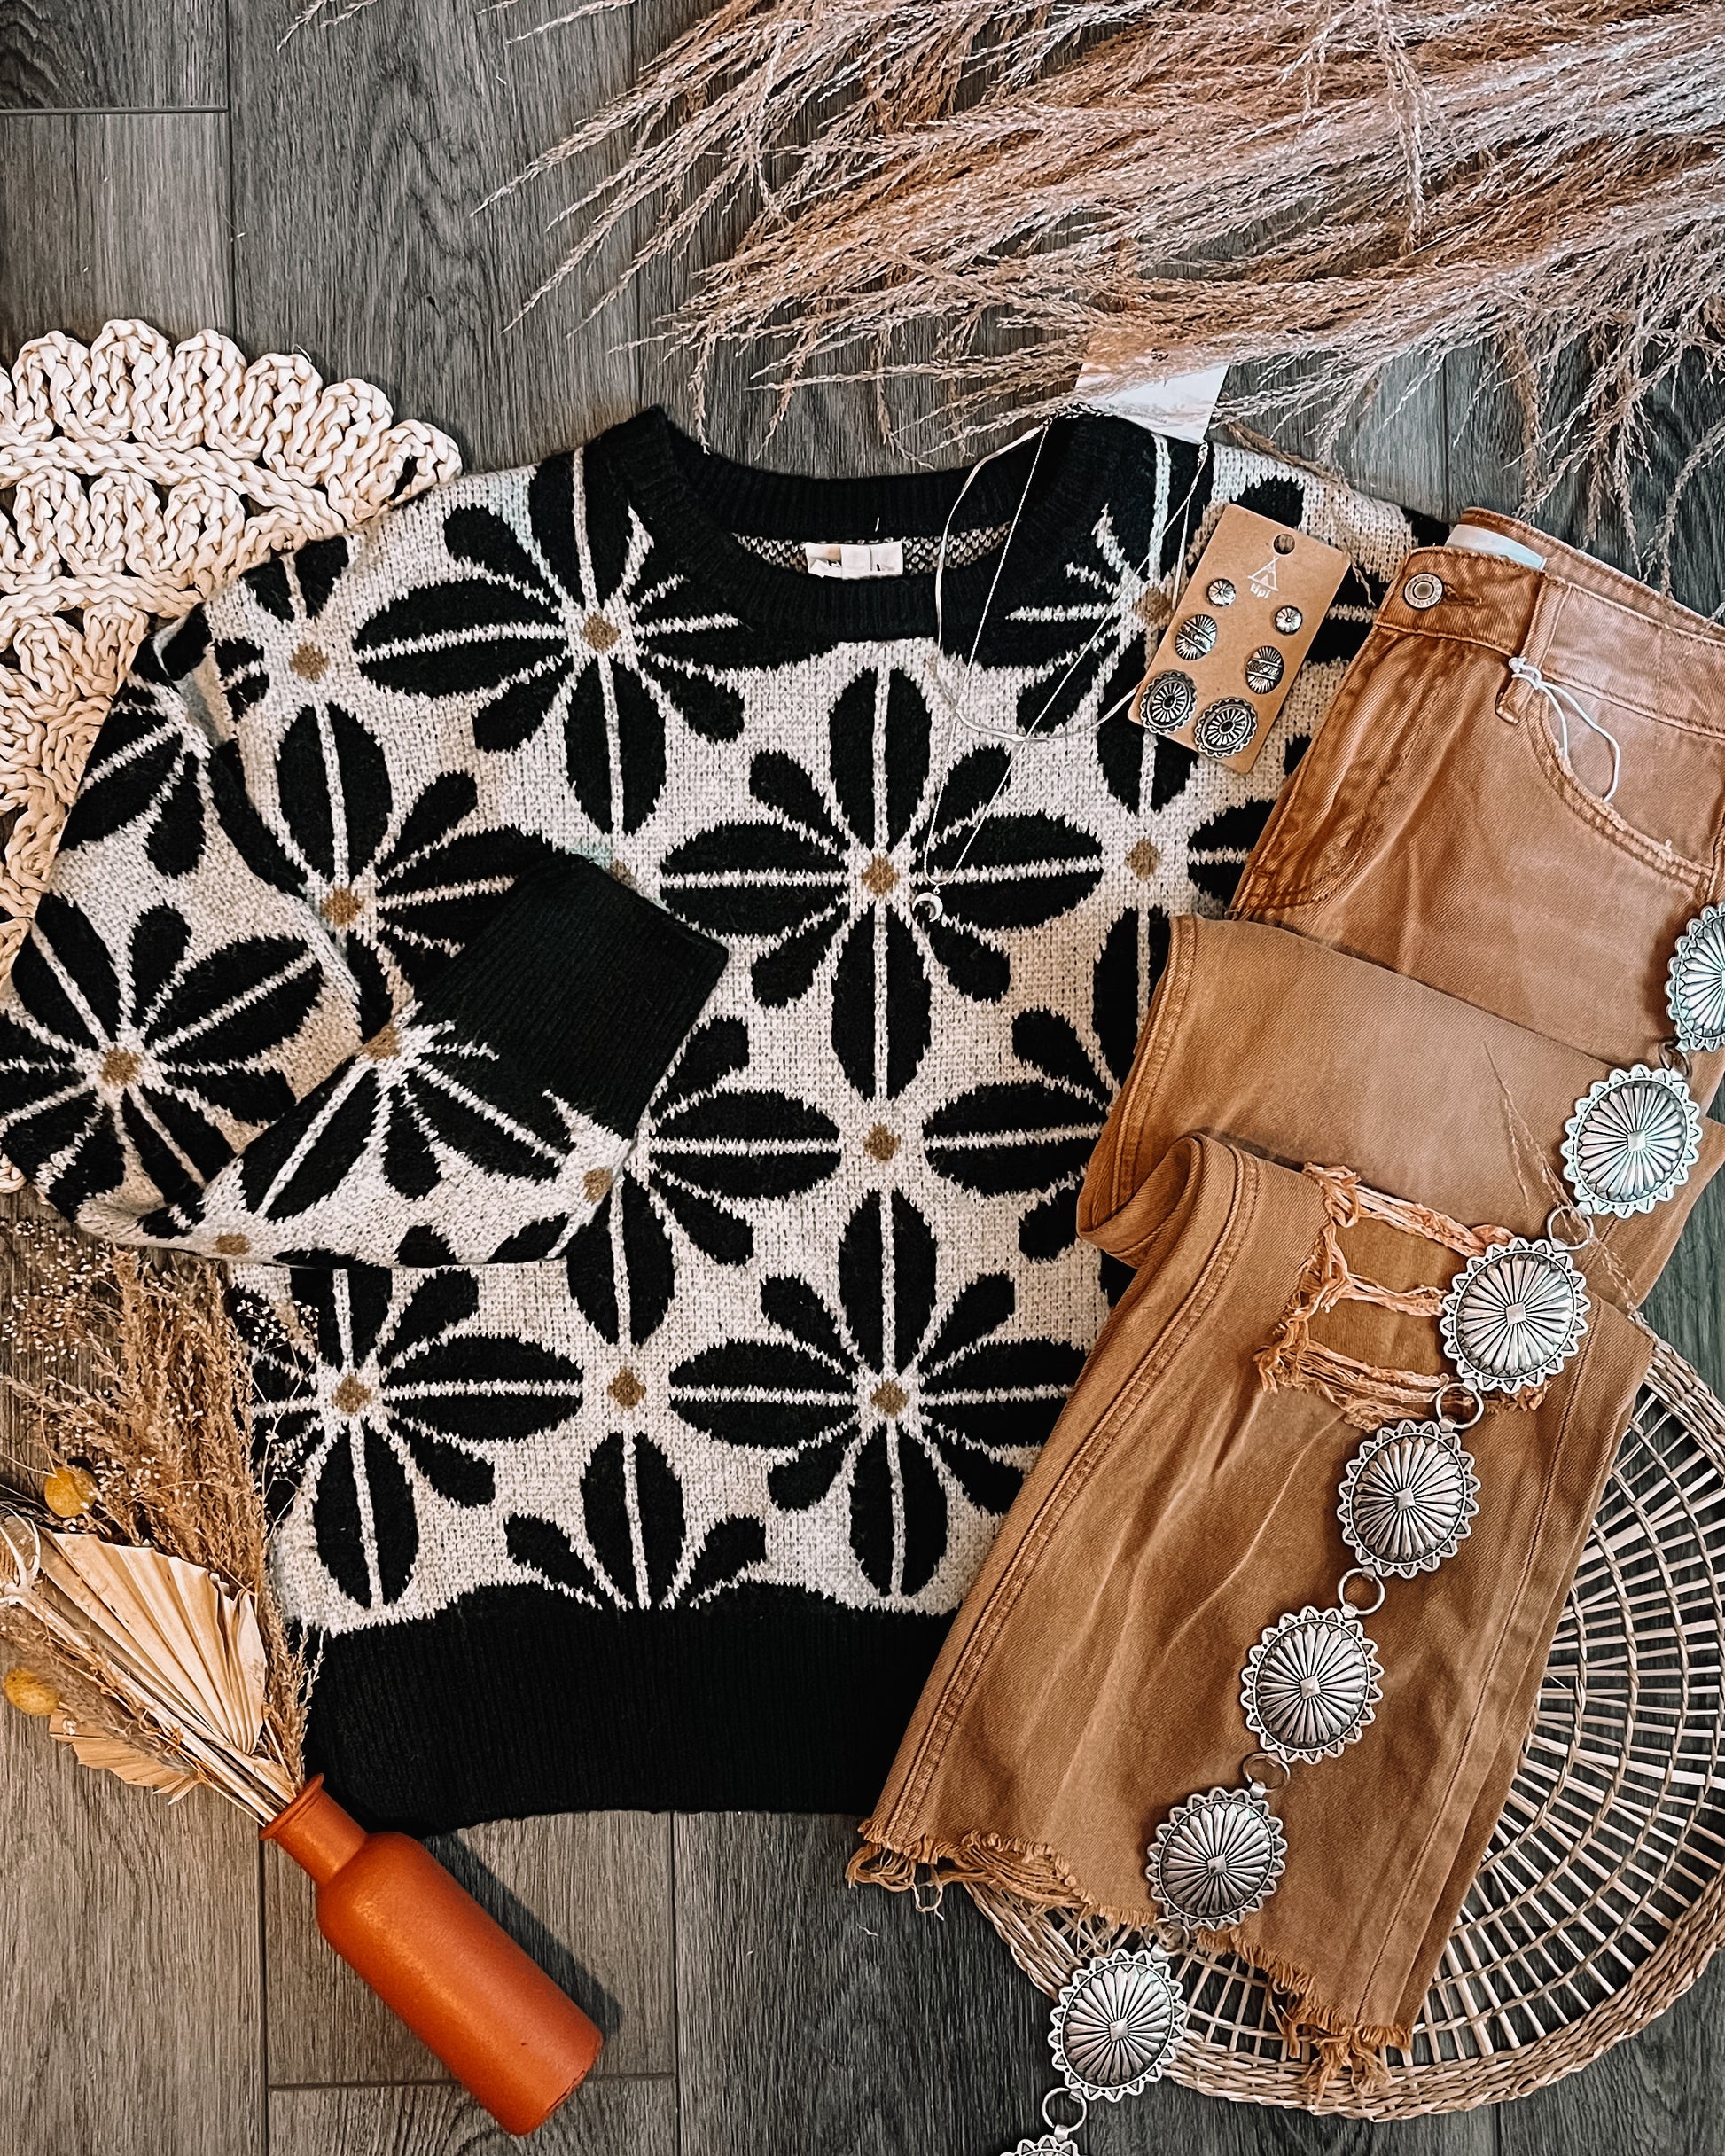 Boho-inspired wild flower sweater with earthy tones and dusty vibes